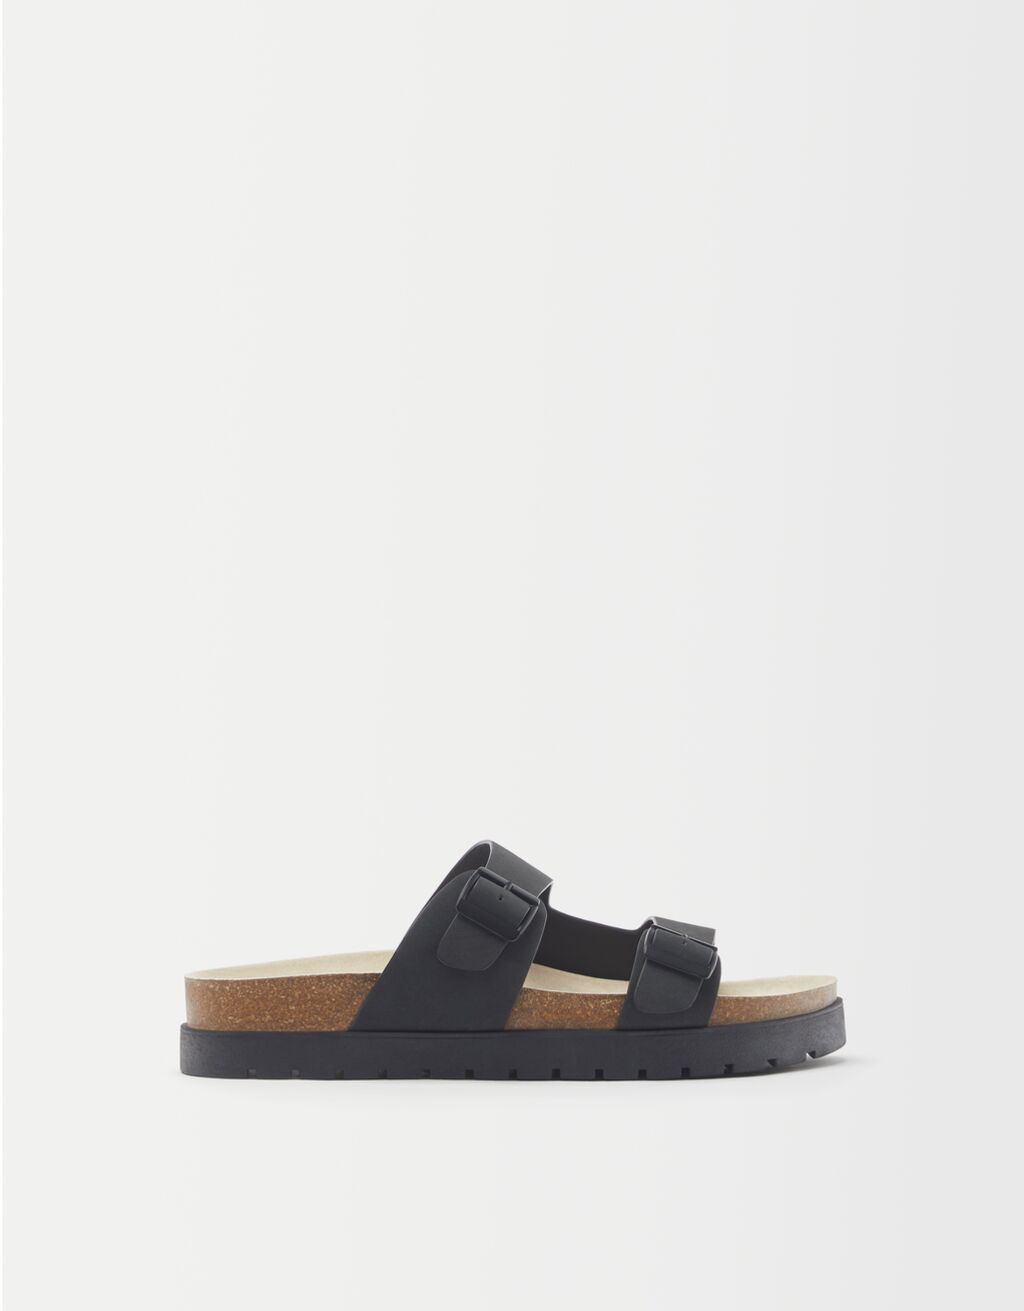 Men’s sandals with straps and buckles